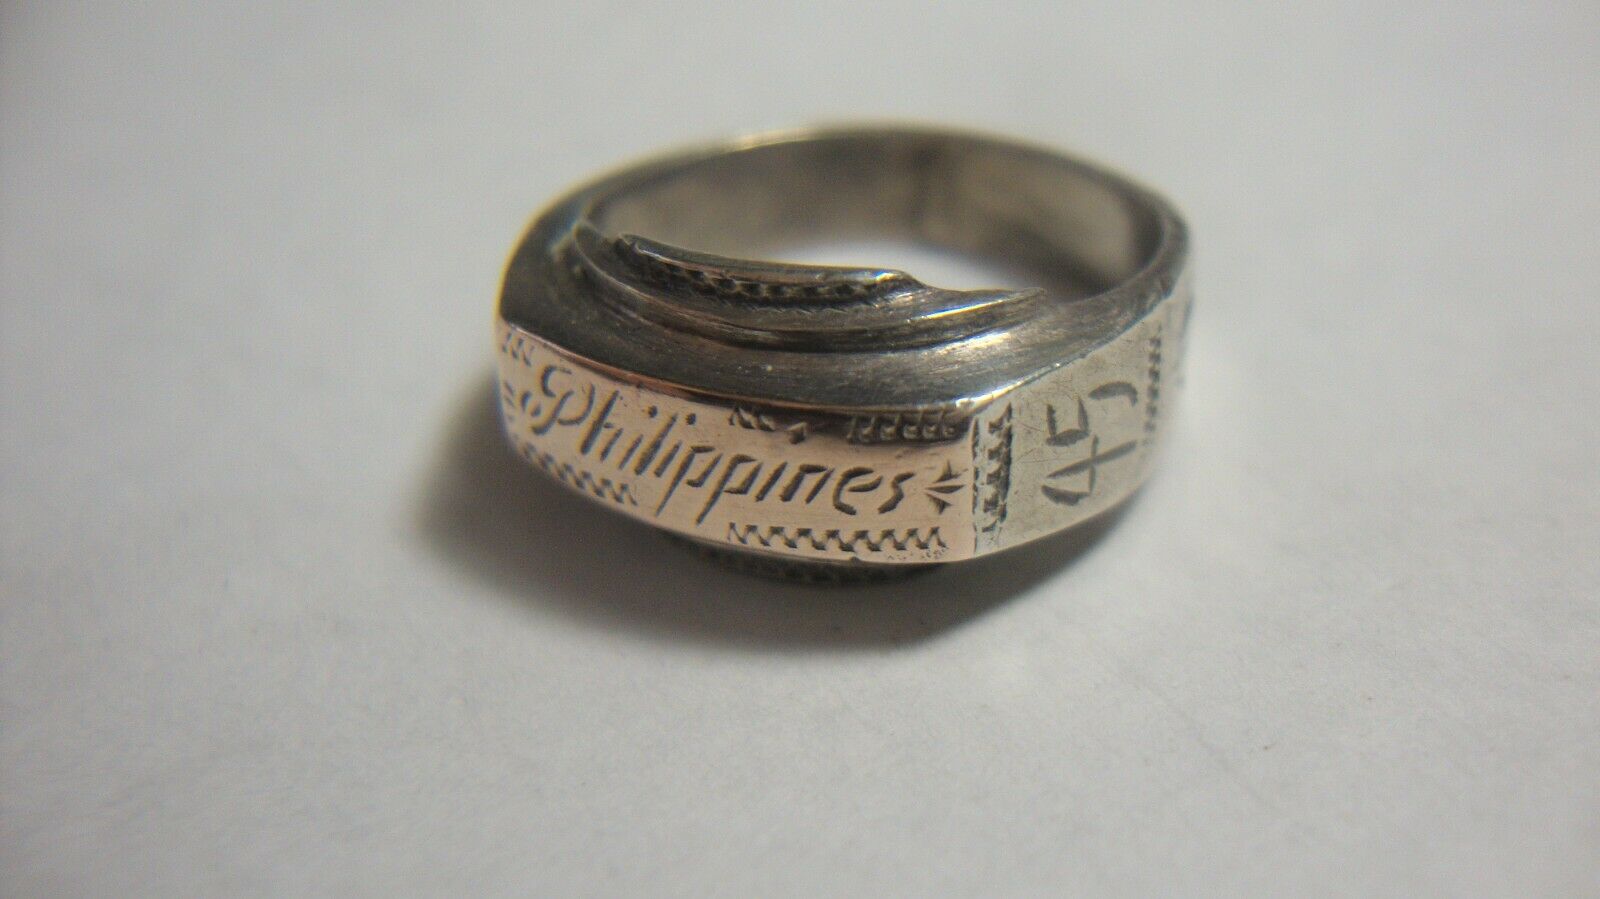 Ww2 1945 Philippines Handcrafted Trench Art Sweetheart Ring Silver & Gold Sz 6